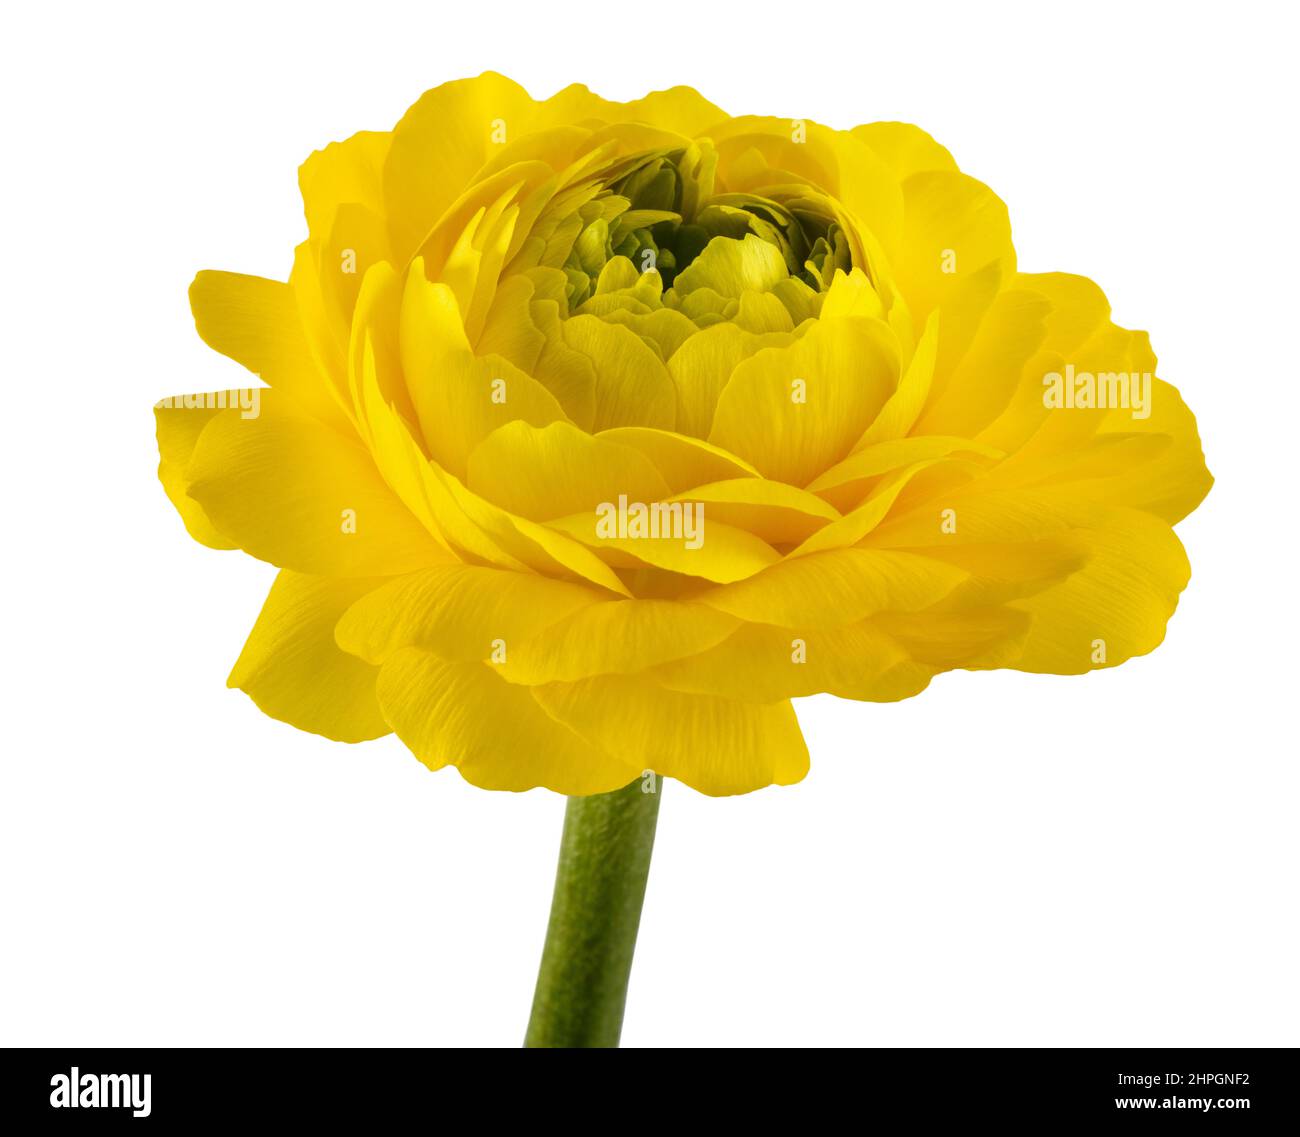 Buttercup flower head isolated on white background Stock Photo